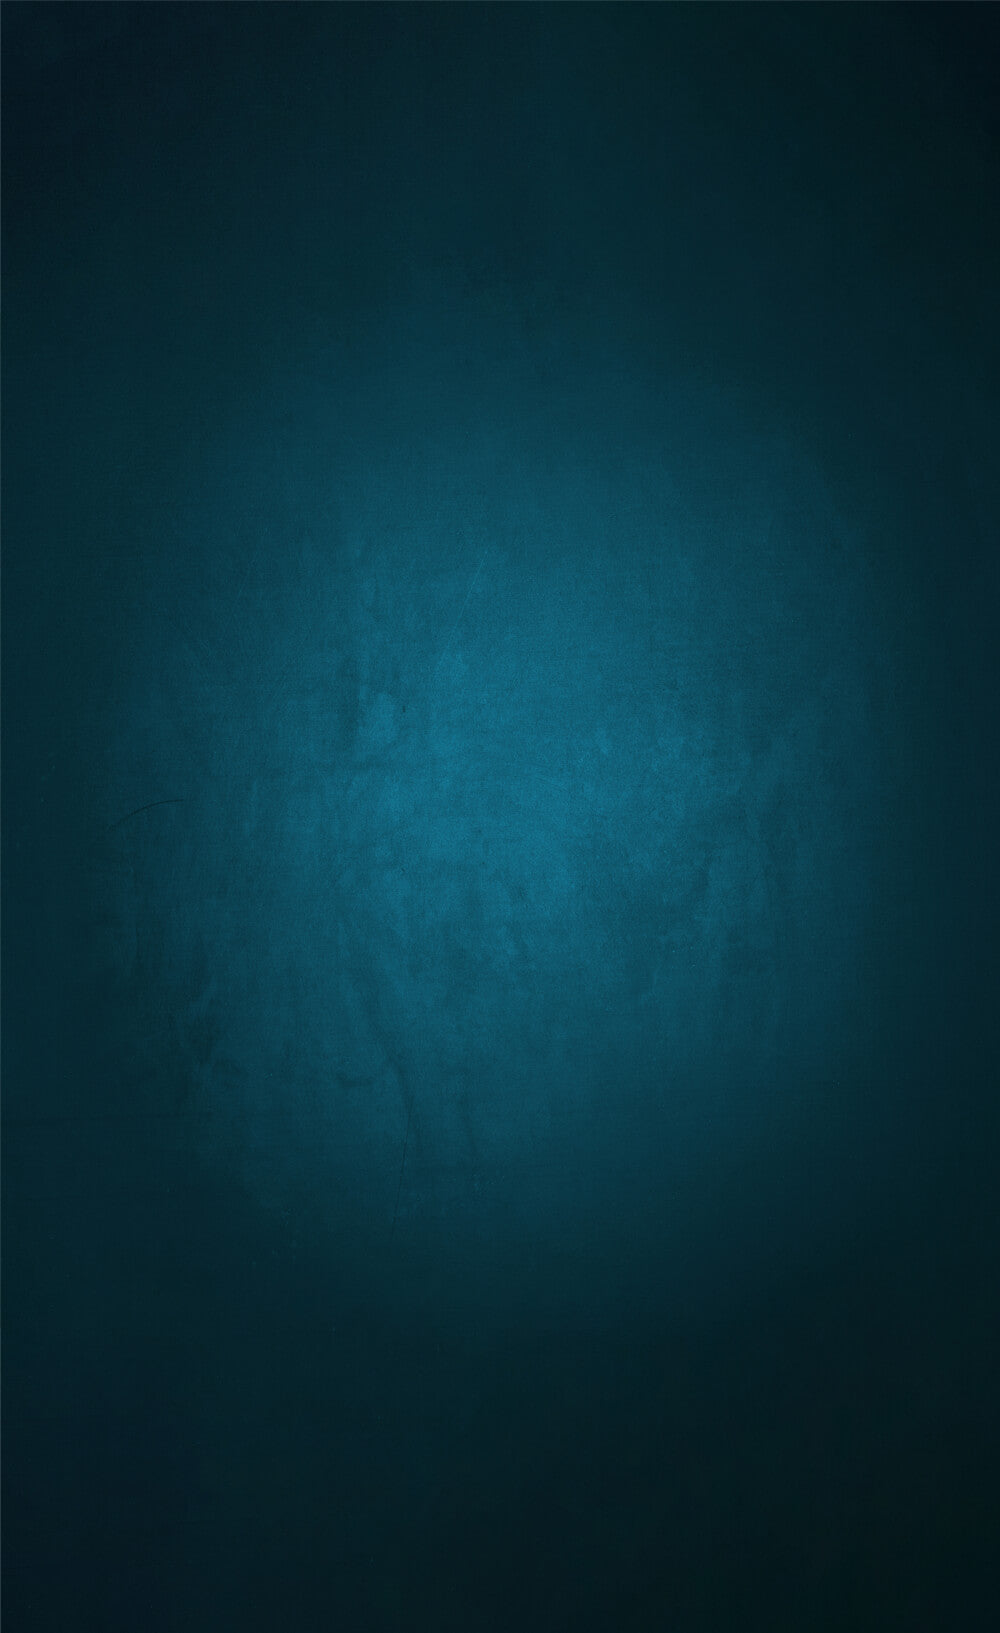 Abstract Textured Sweep Blue Gradient Backdrop D165